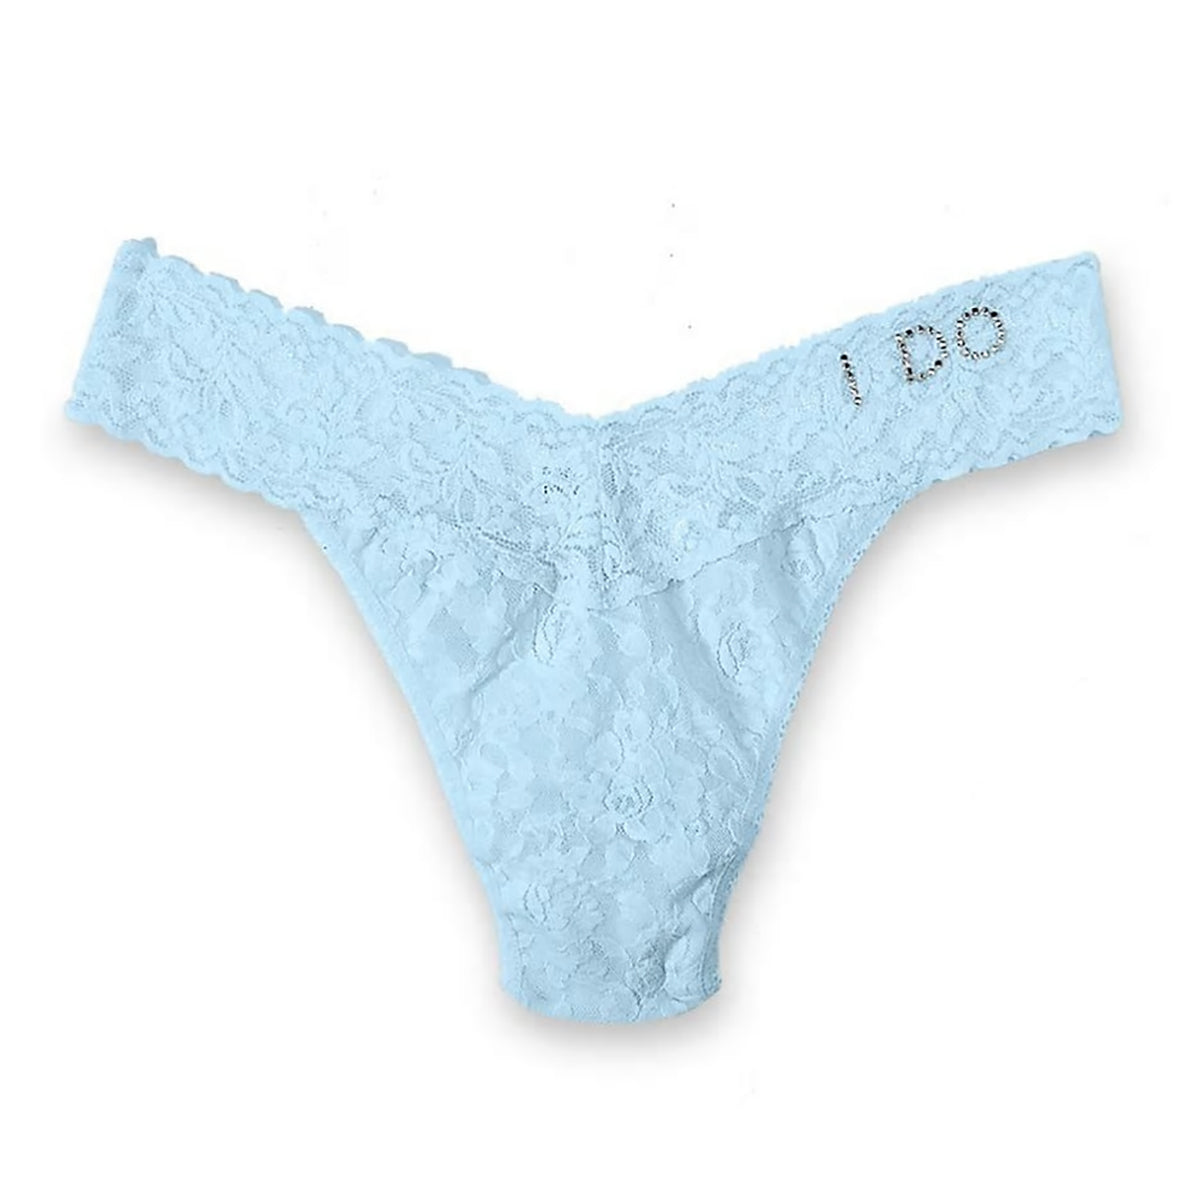 Hanky Panky "I DO" Lace Original Rise Thong Bridal 6511 in Blue